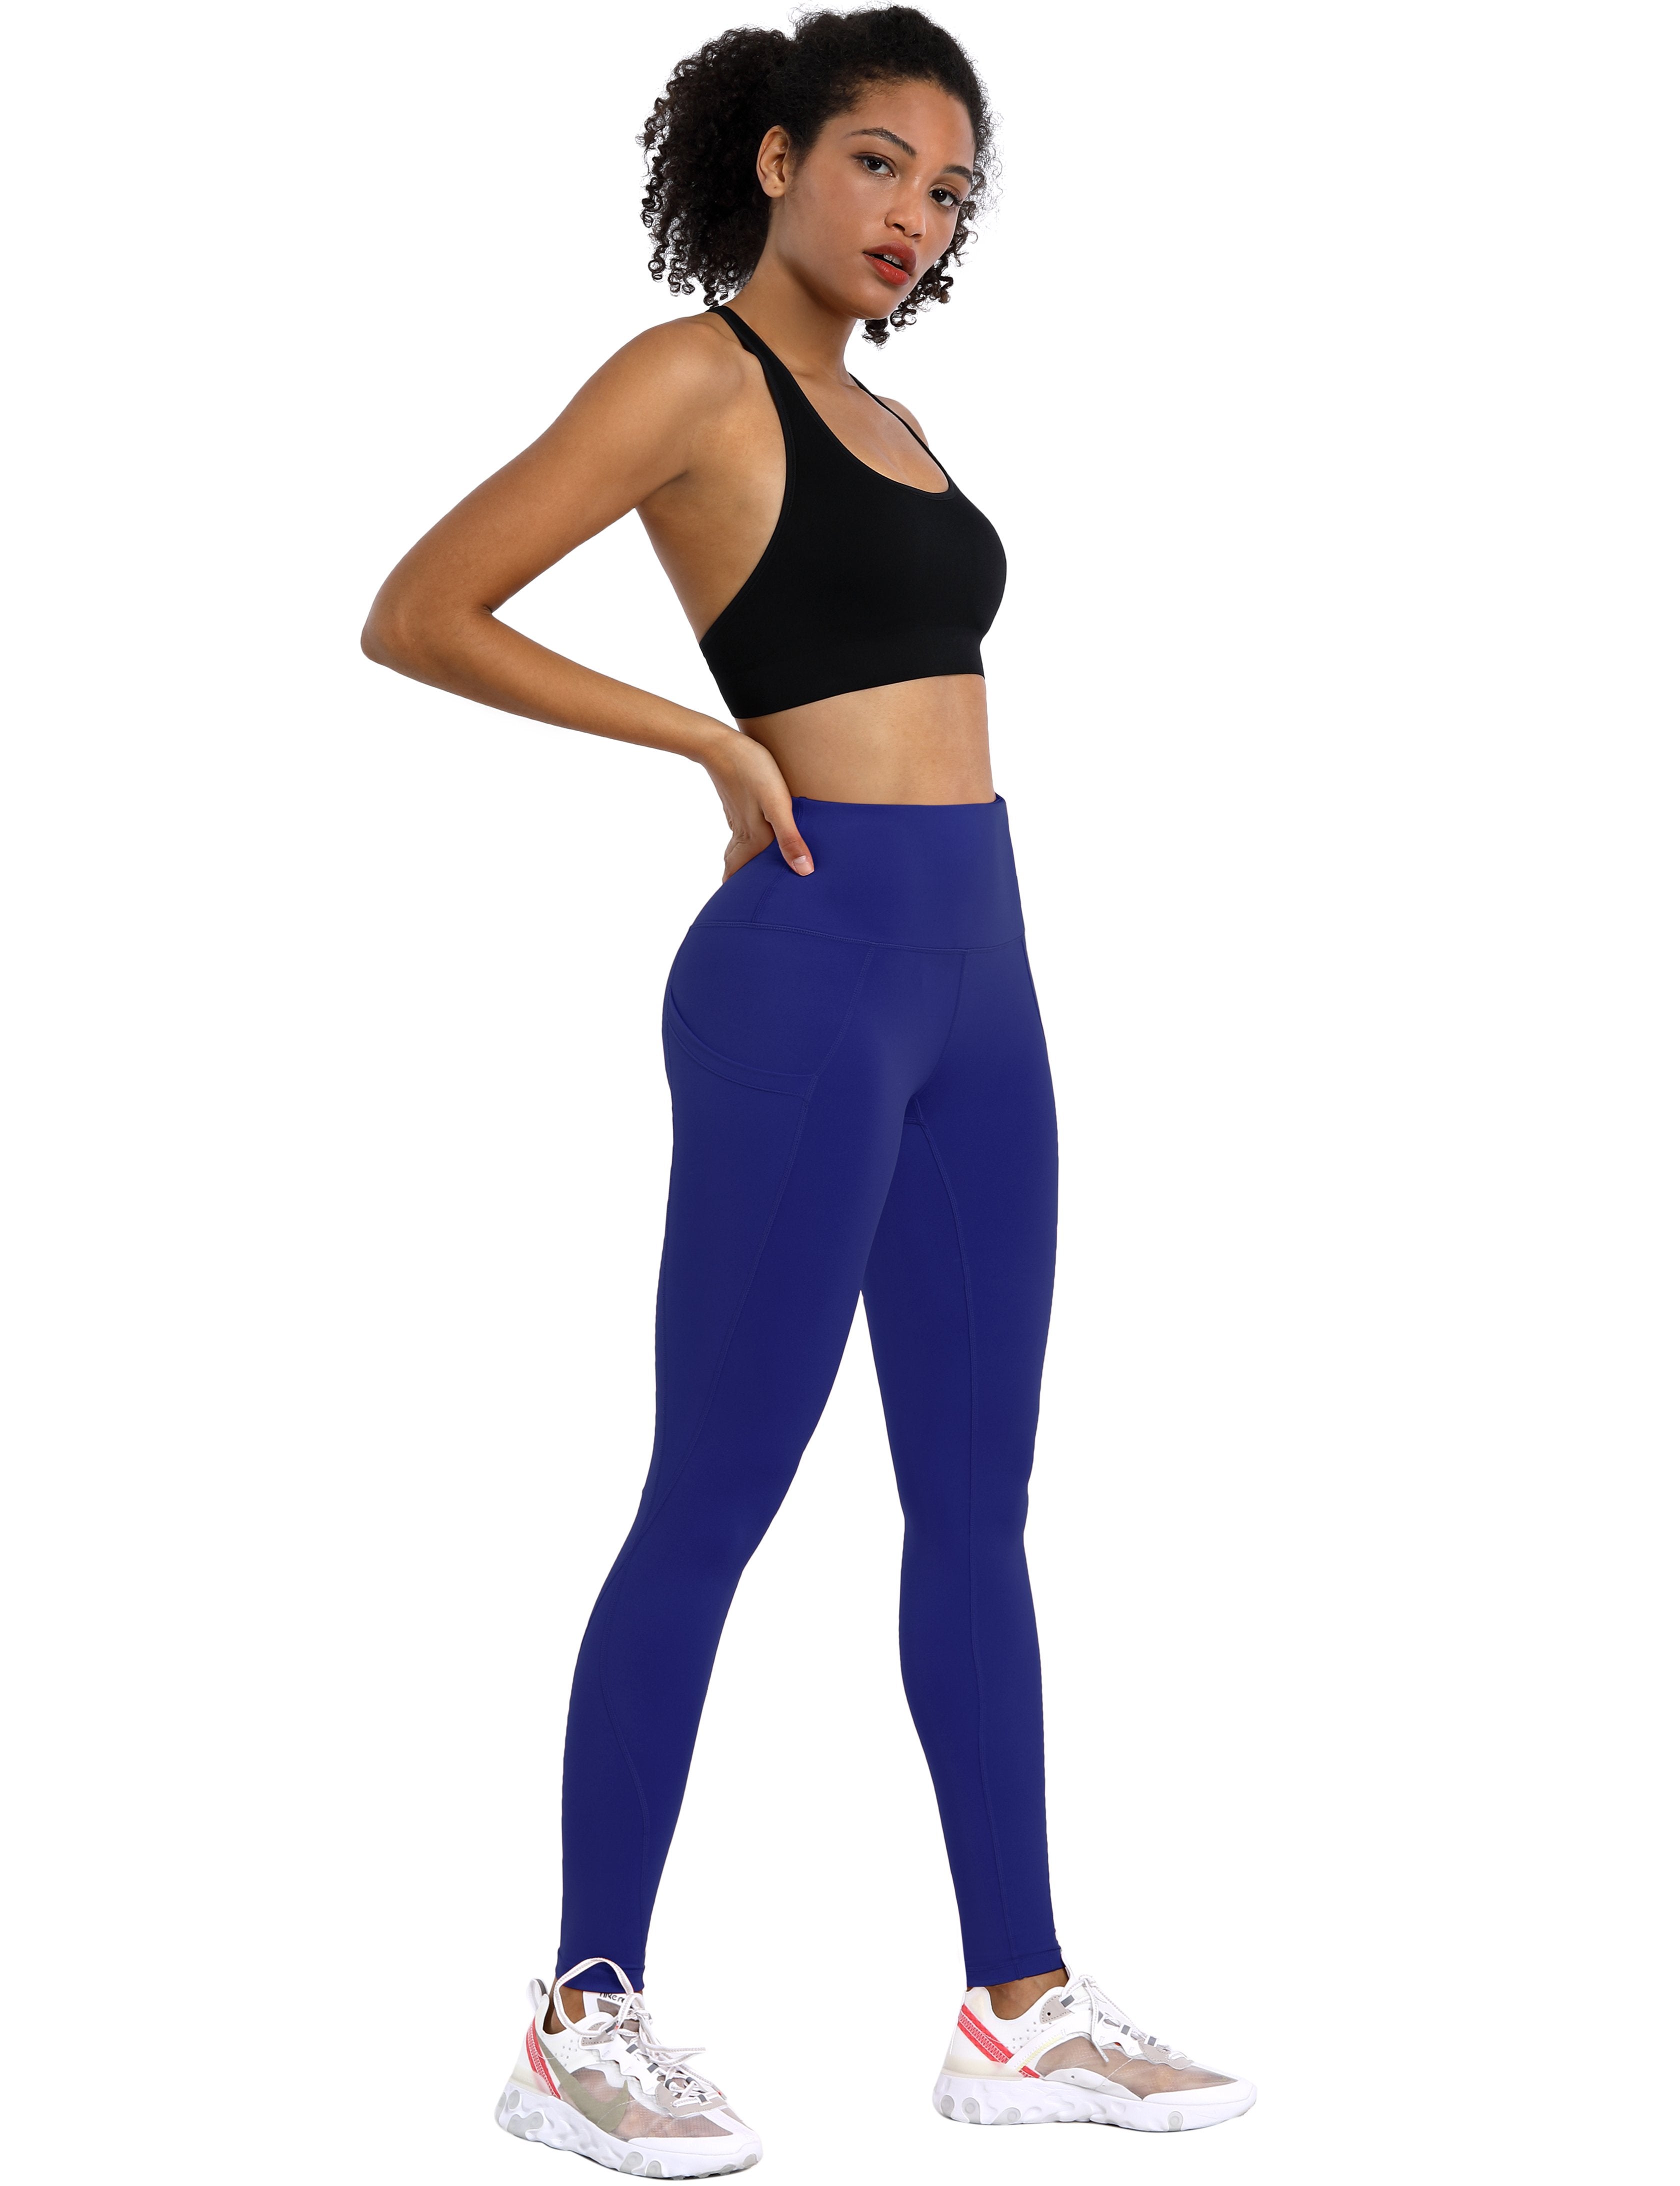 High Waist Side Pockets Yoga Pants navy 75% Nylon, 25% Spandex Fabric doesn't attract lint easily 4-way stretch No see-through Moisture-wicking Tummy control Inner pocket